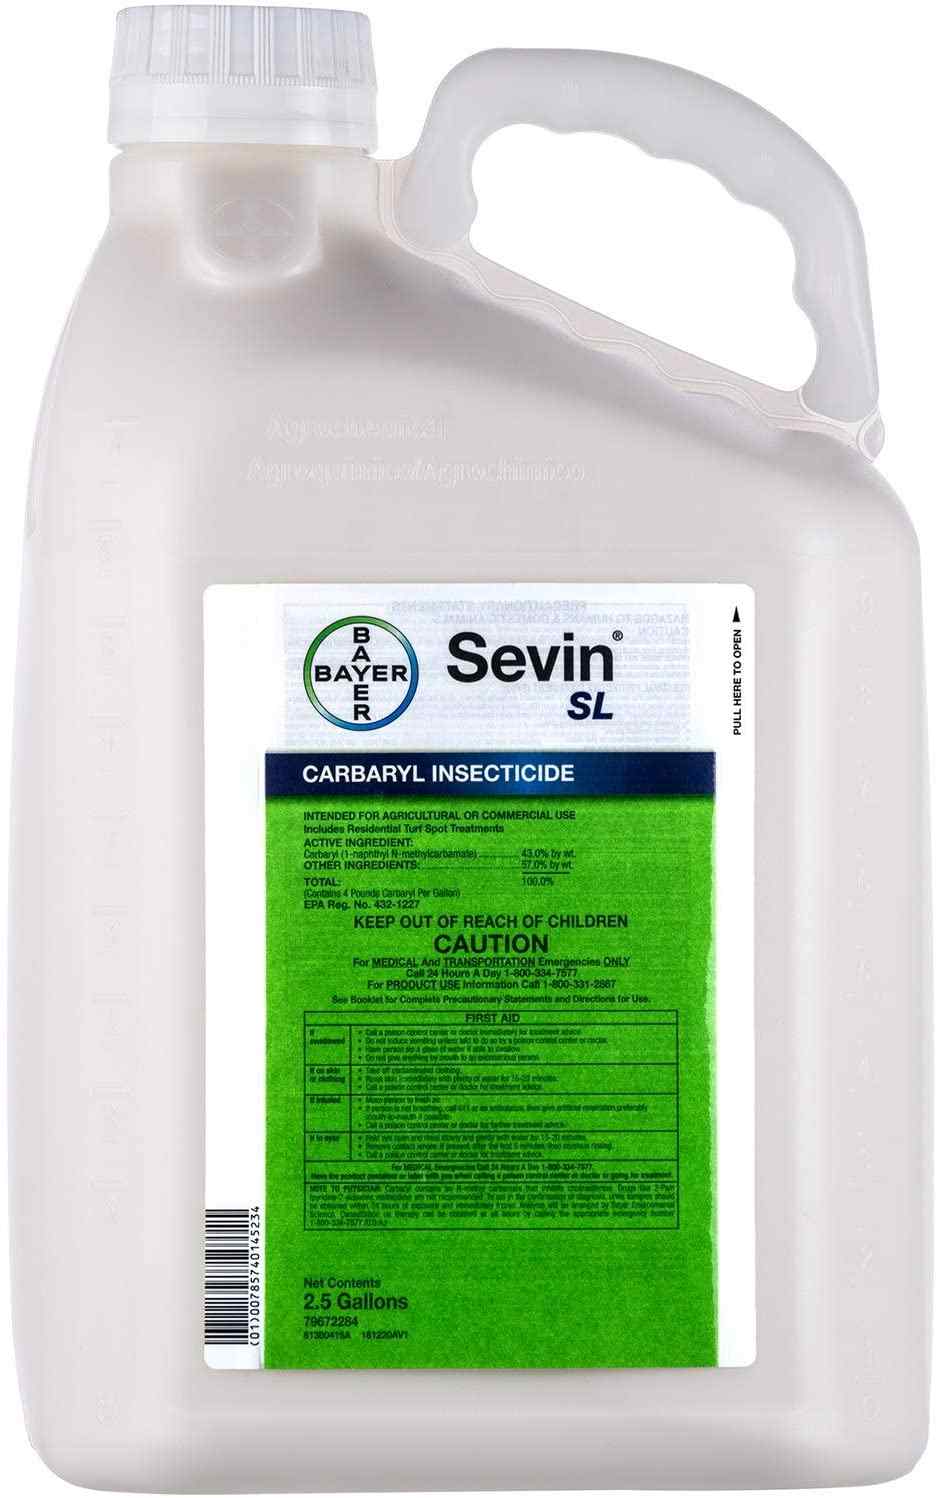 SEVIN SL CARBARYL INSECTICIDE